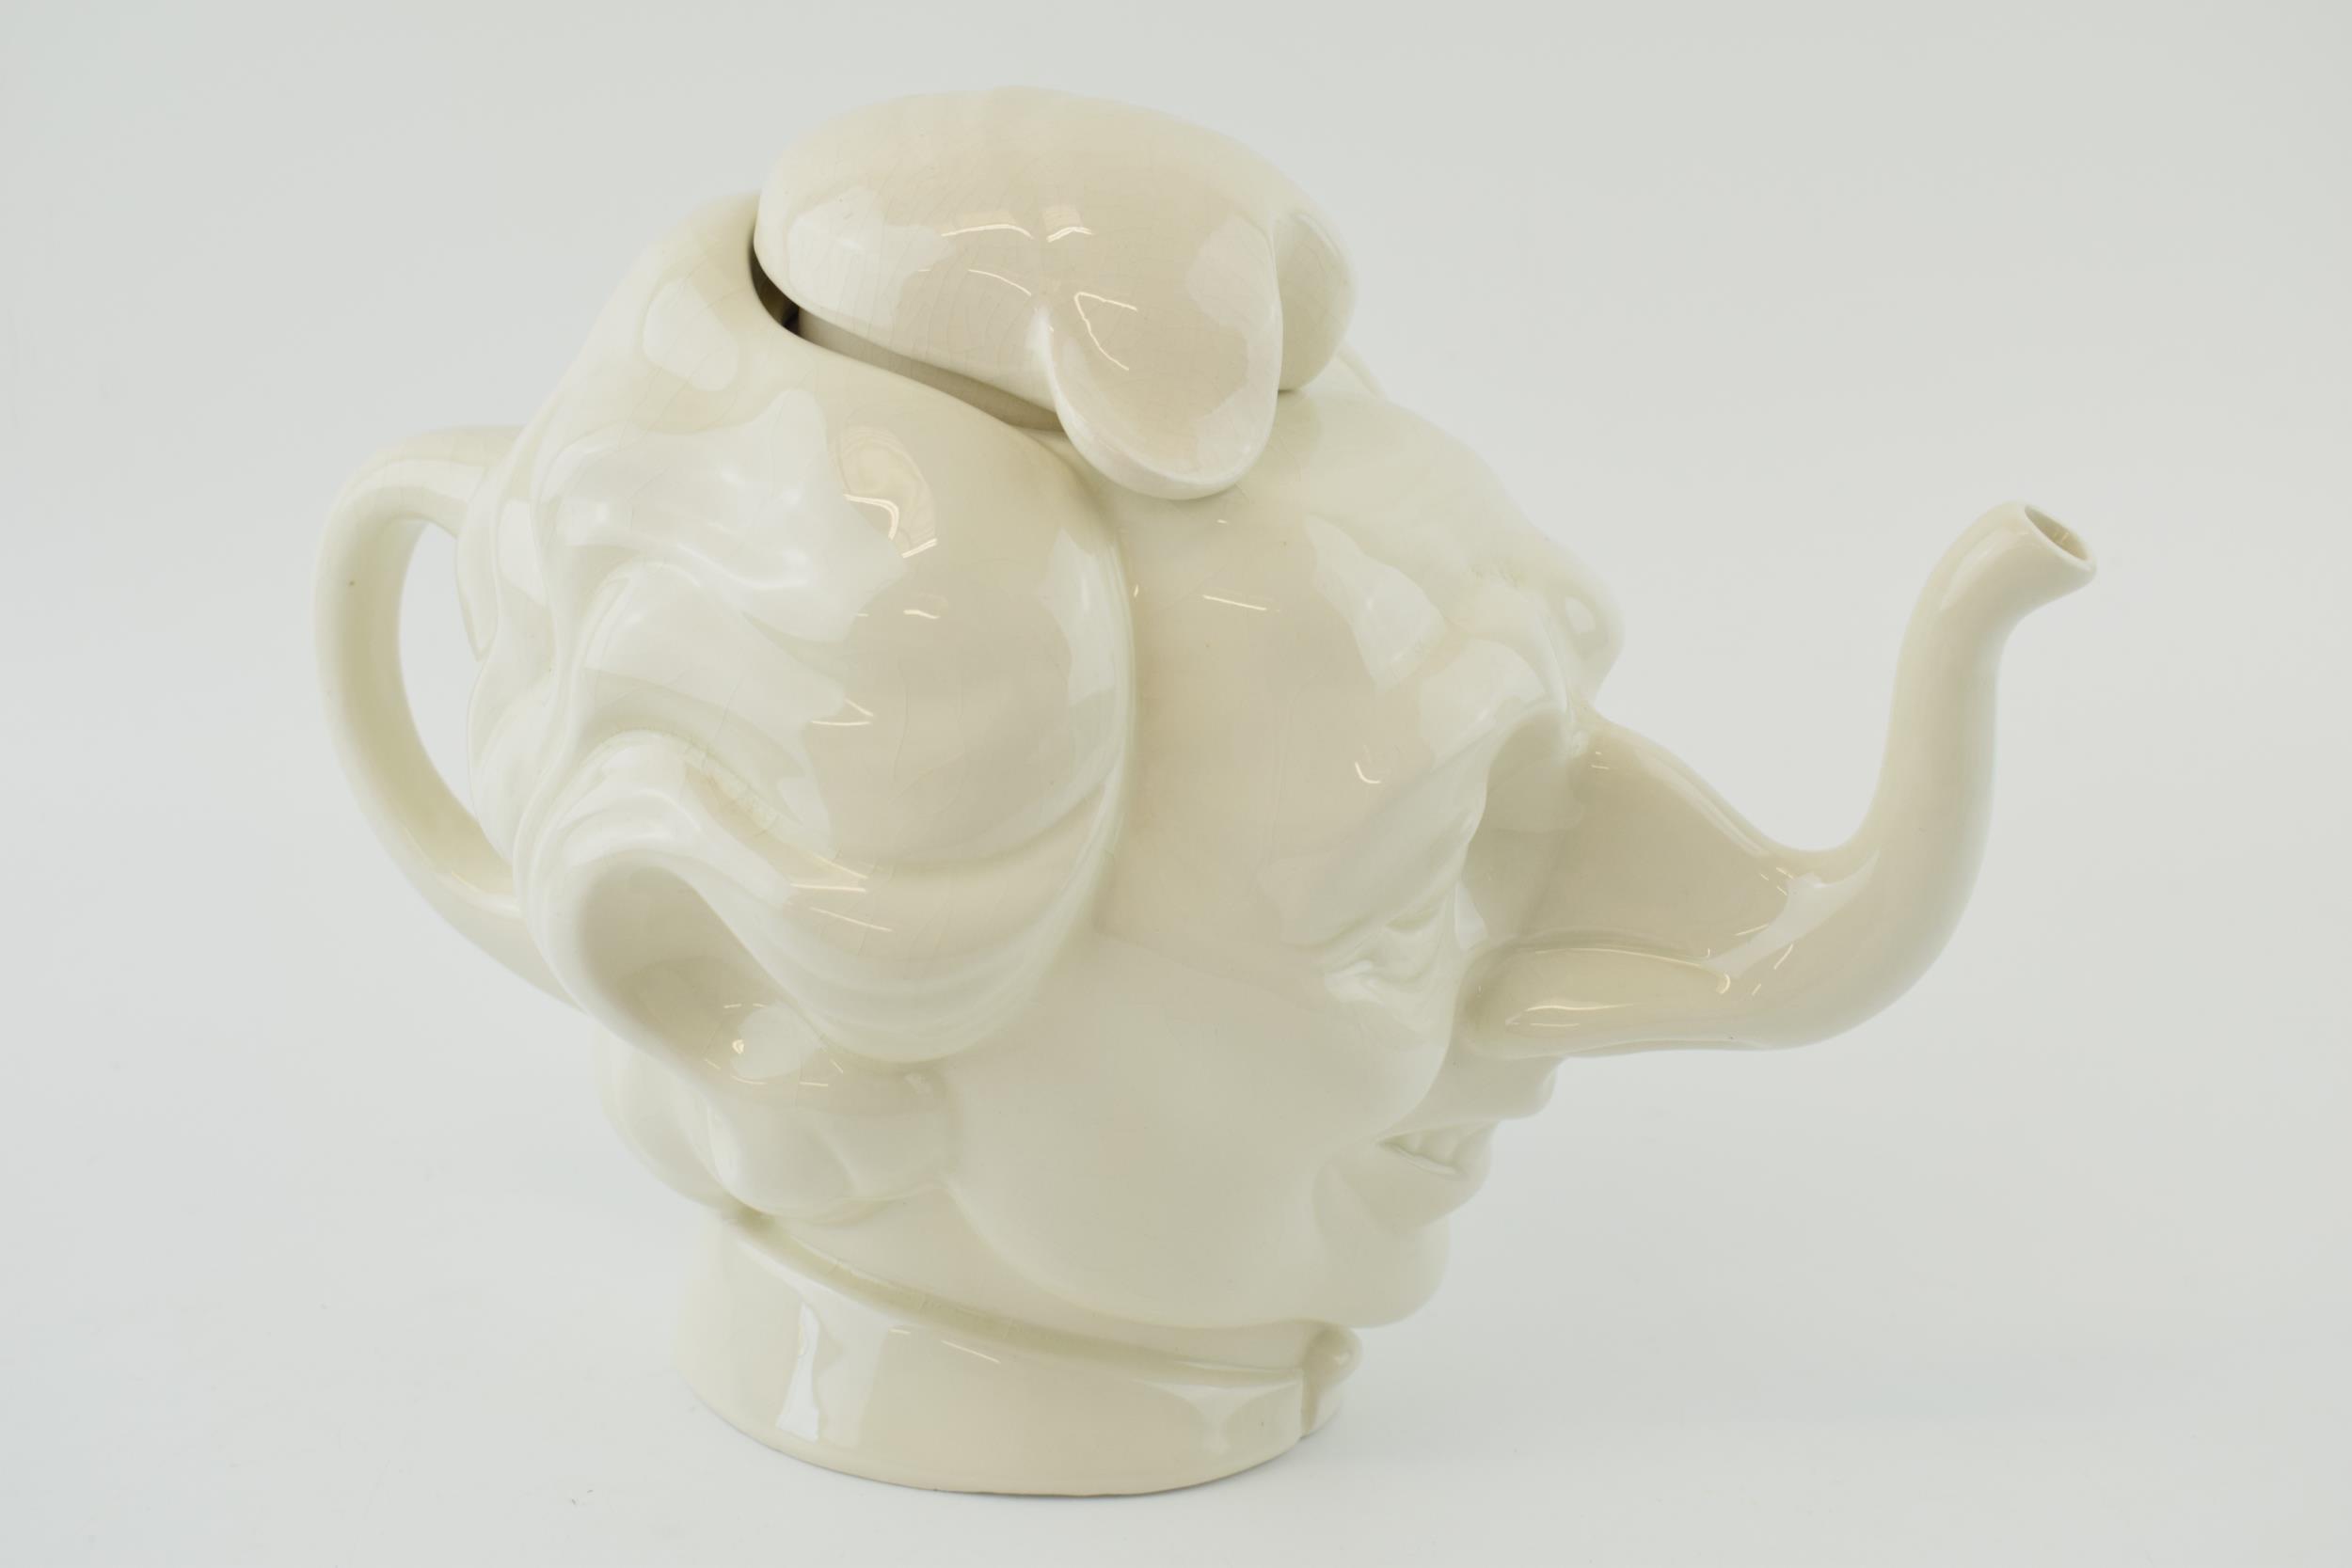 Spitting Image Margaret Thatcher teapot by Fluck and Law, made by Carlton Ware, unmarked, 31cm long. - Image 2 of 3